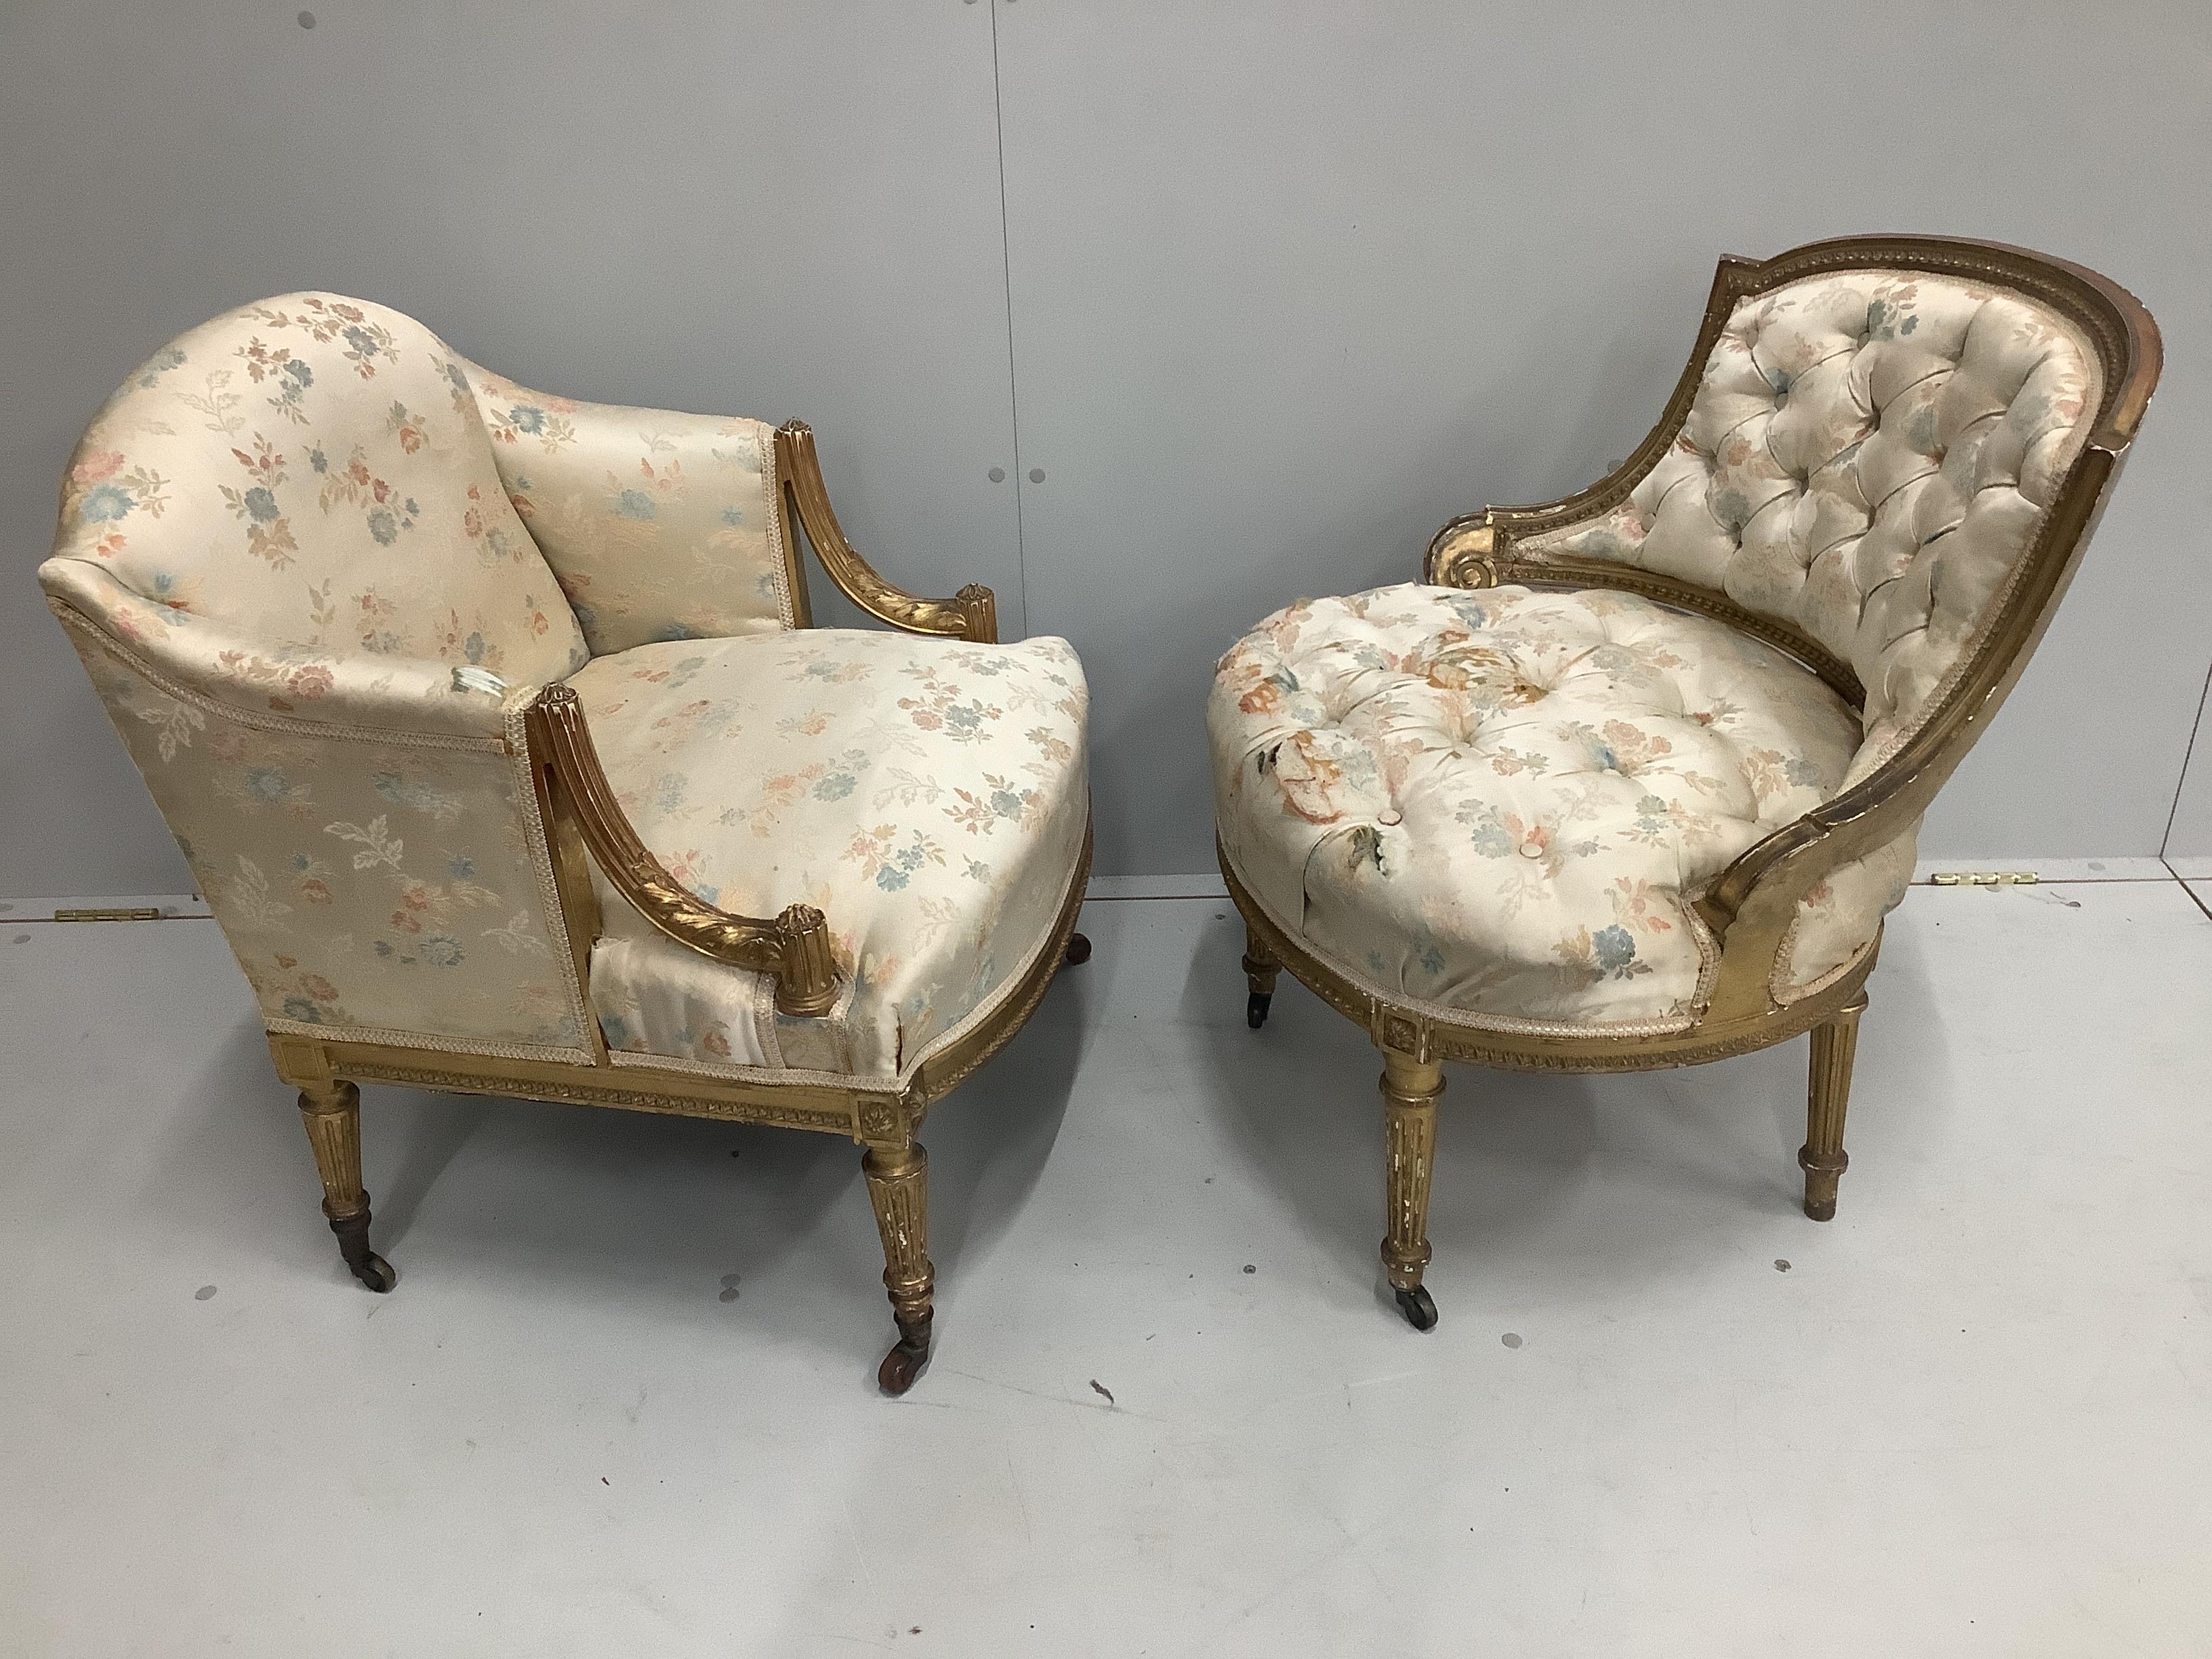 Two late 19th century giltwood and composition salon chairs, larger width 64cm, height 74cm